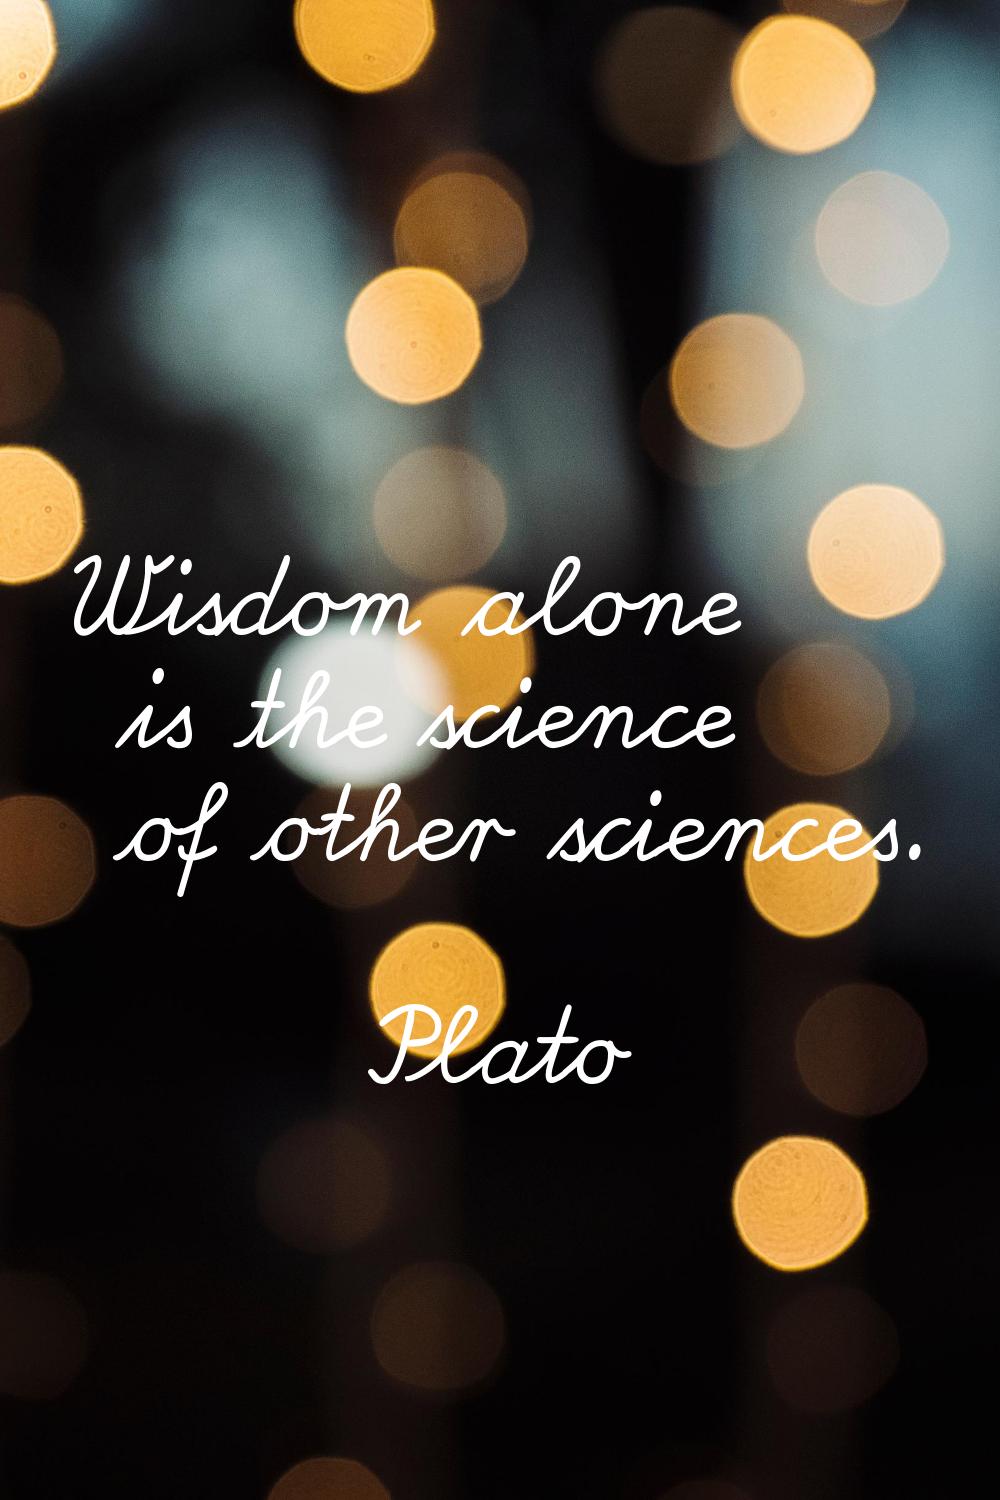 Wisdom alone is the science of other sciences.